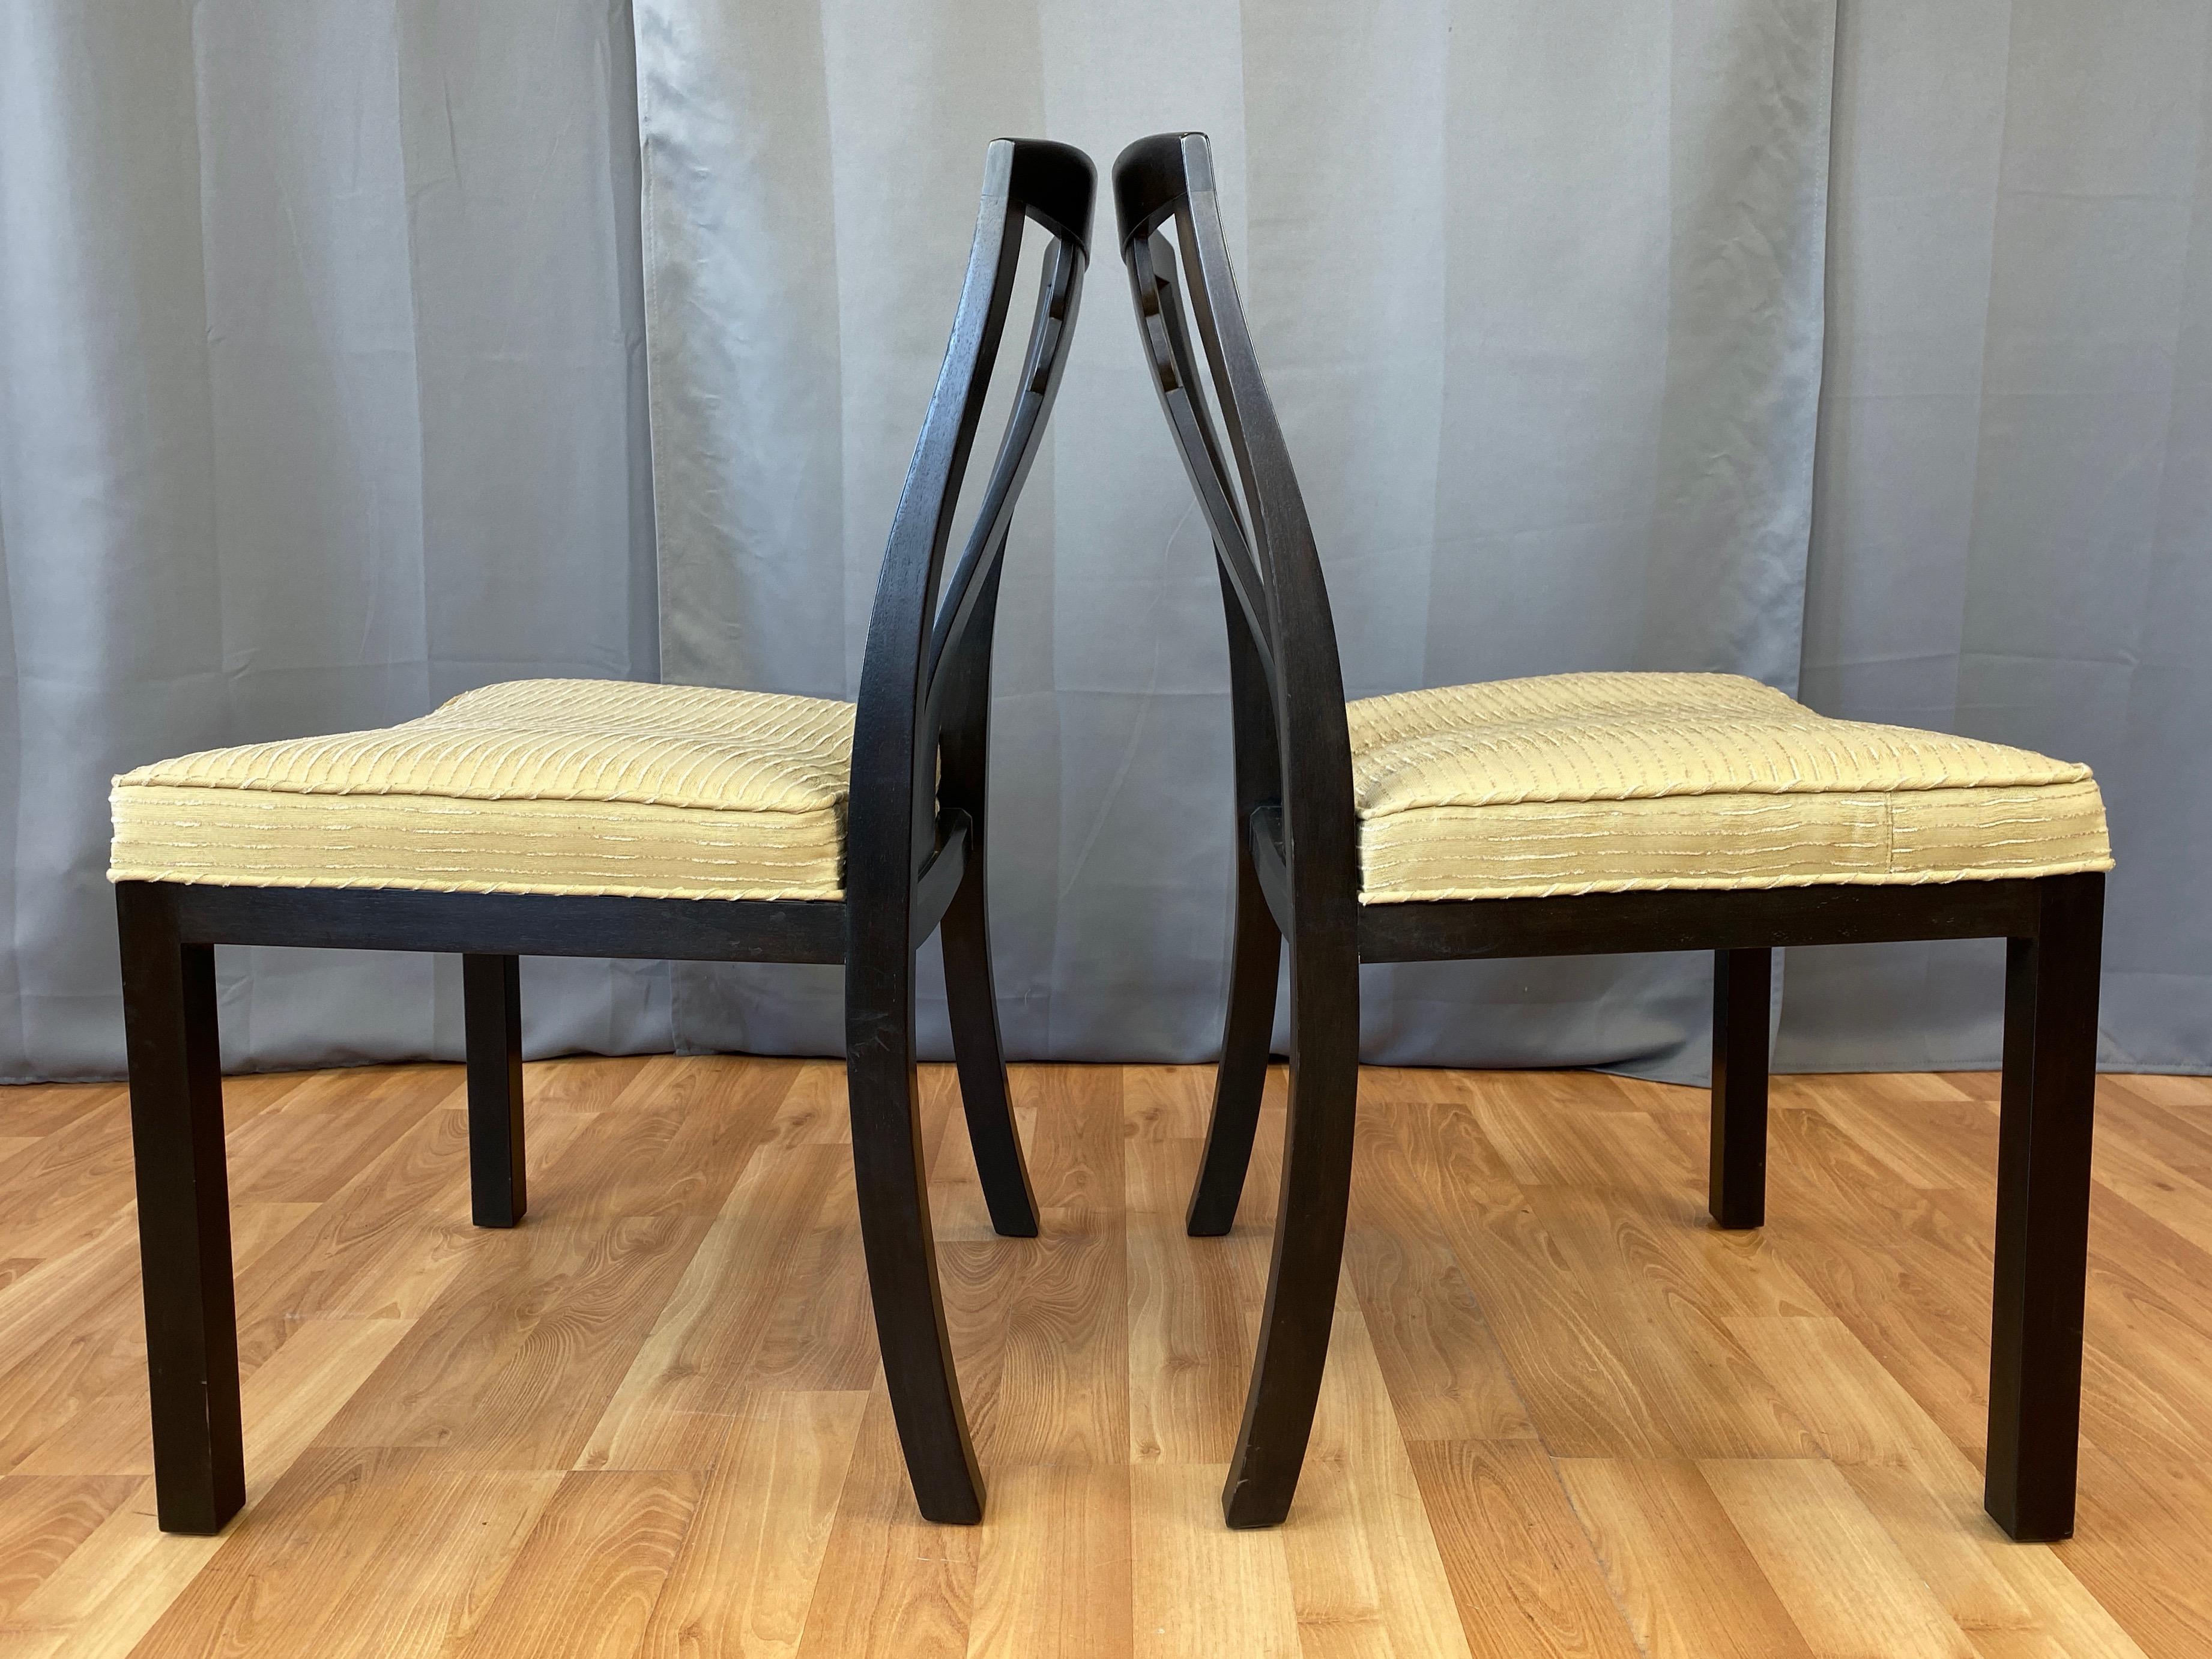 Mid-20th Century Pair of Michael Taylor for Baker Furniture T-Back Dining Chairs, 1950s